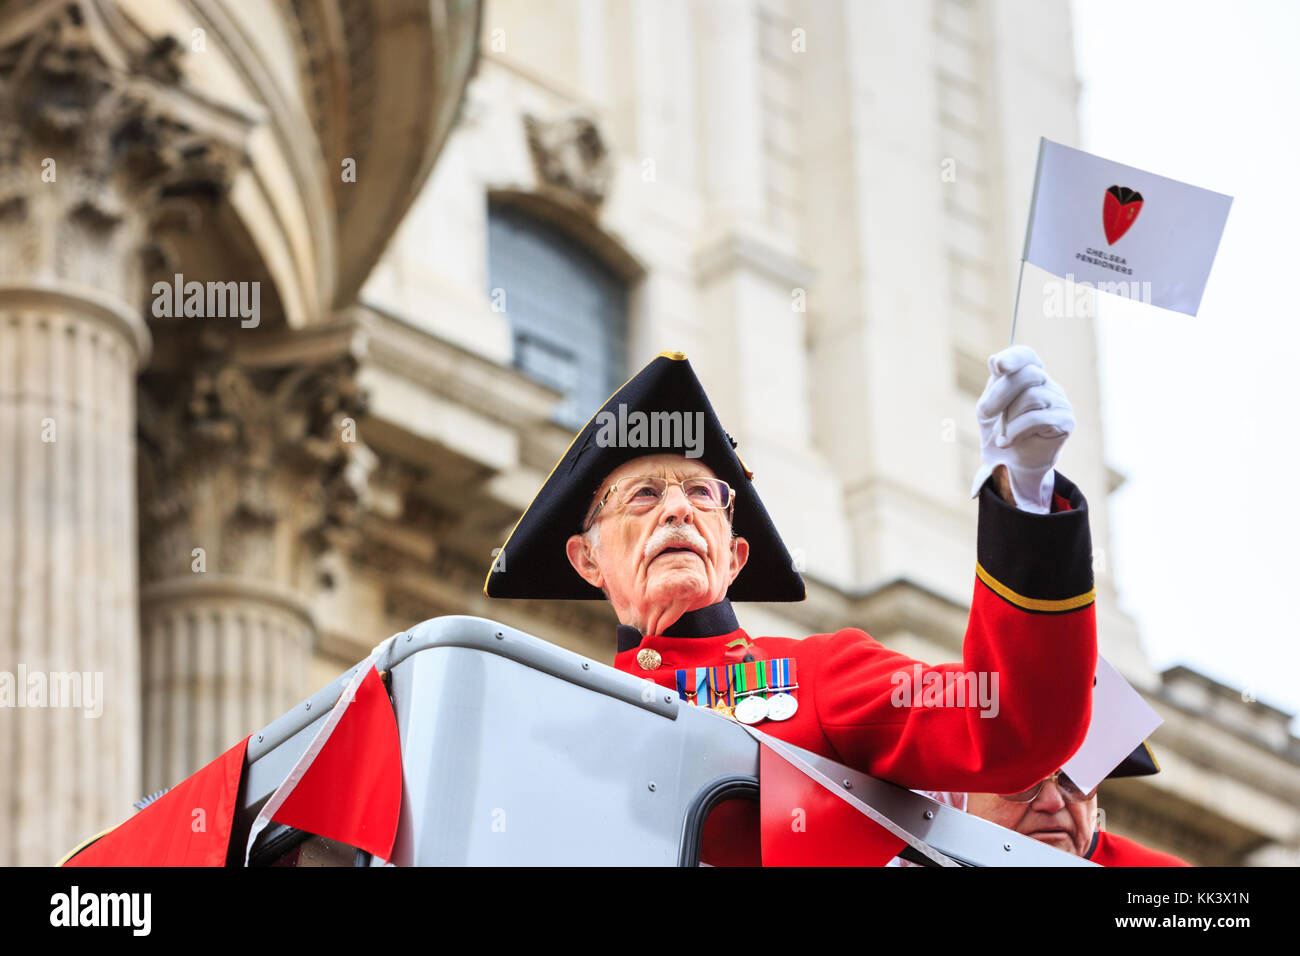 Chelsea Pensioner waving at the crowds, Lord Mayor's Show parade in the City of London, London, United Kingdom Stock Photo